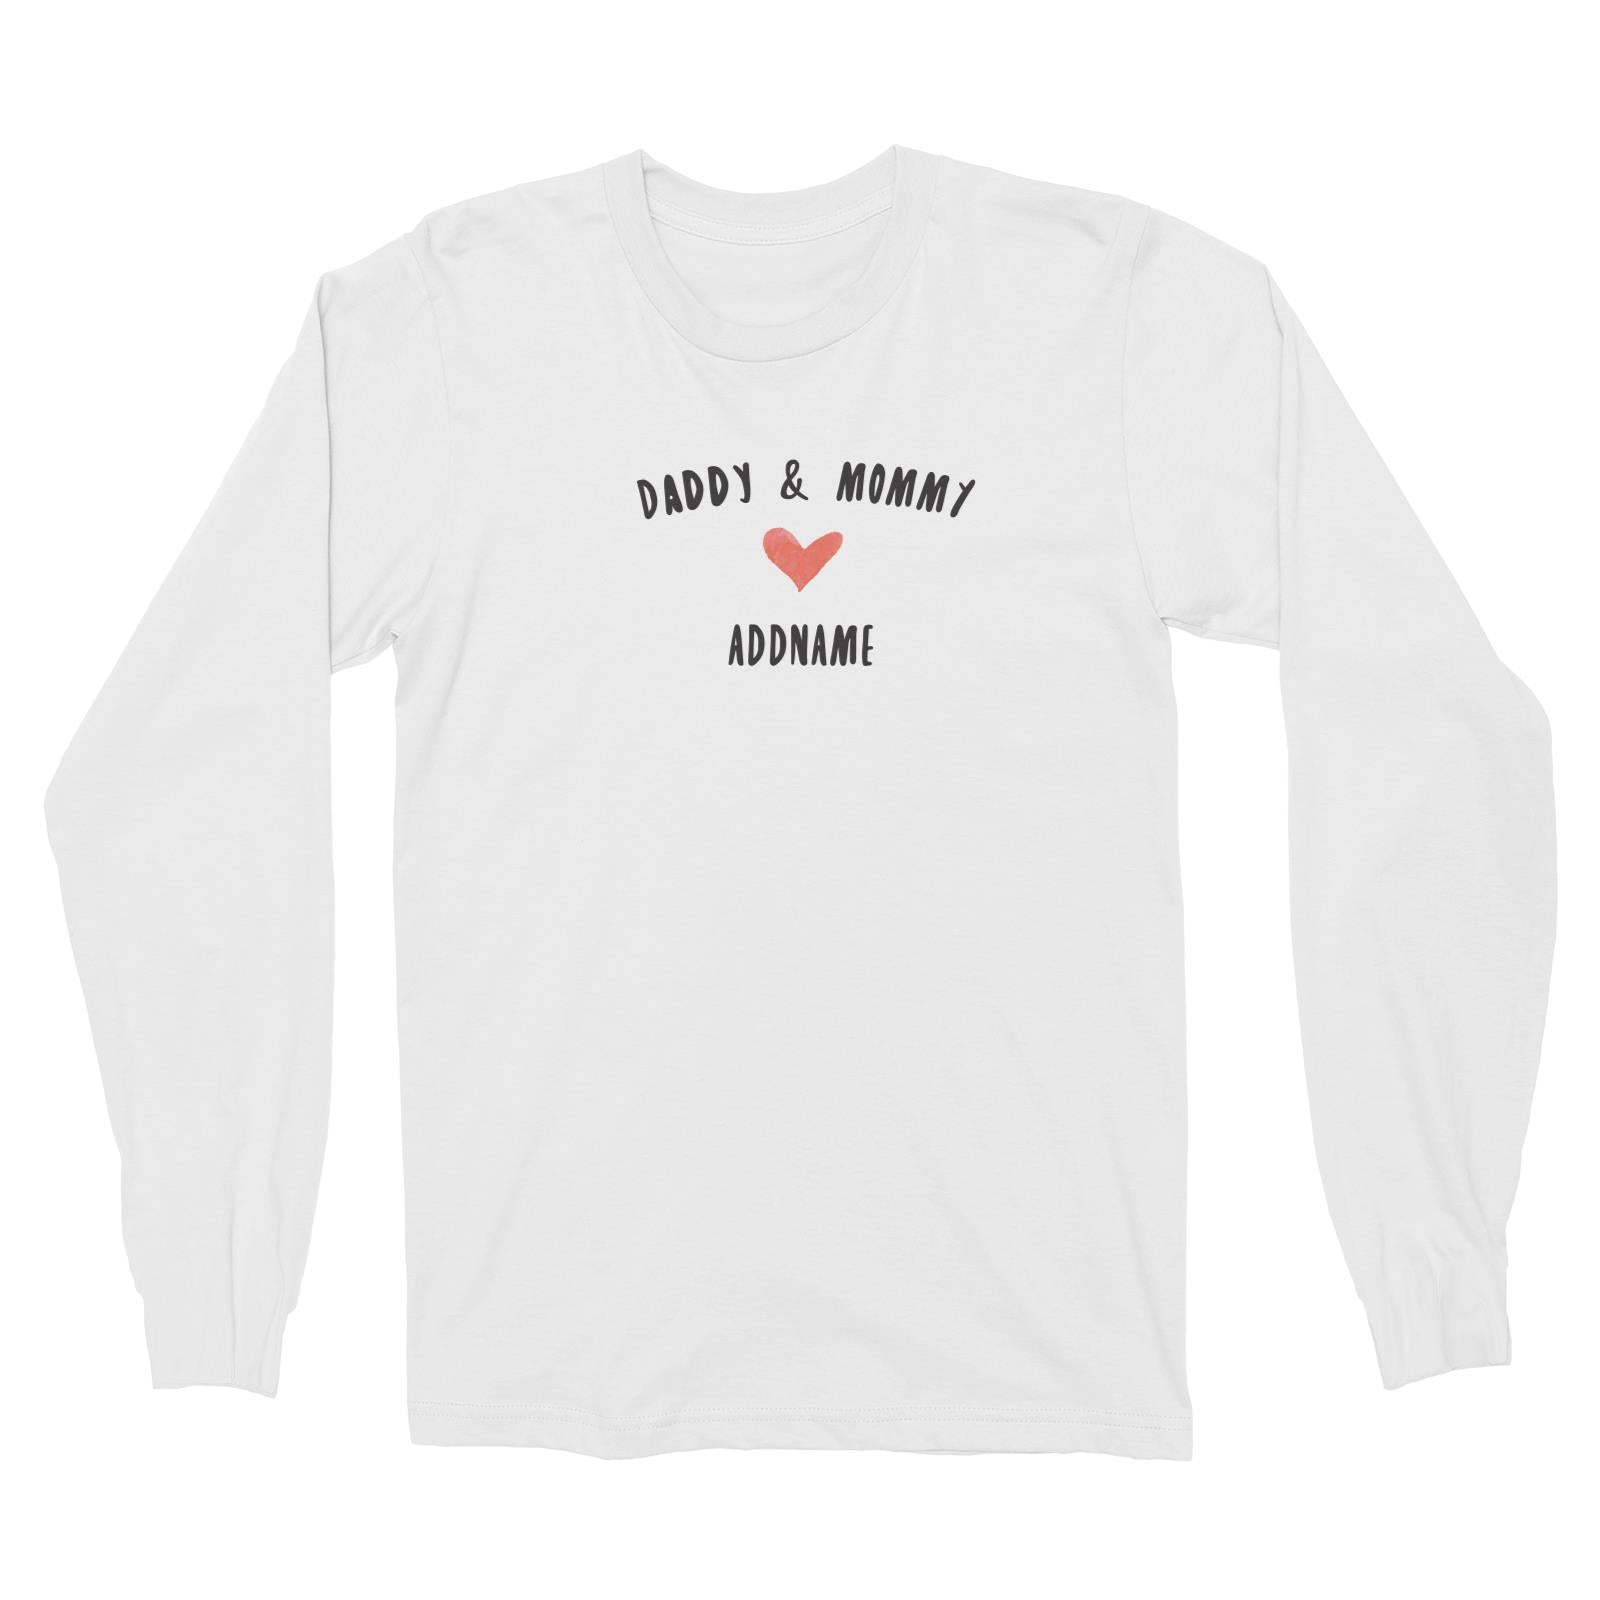 Daddy & Mommy Love Addname Long Sleeve Unisex T-Shirt  Matching Family Personalizable Designs